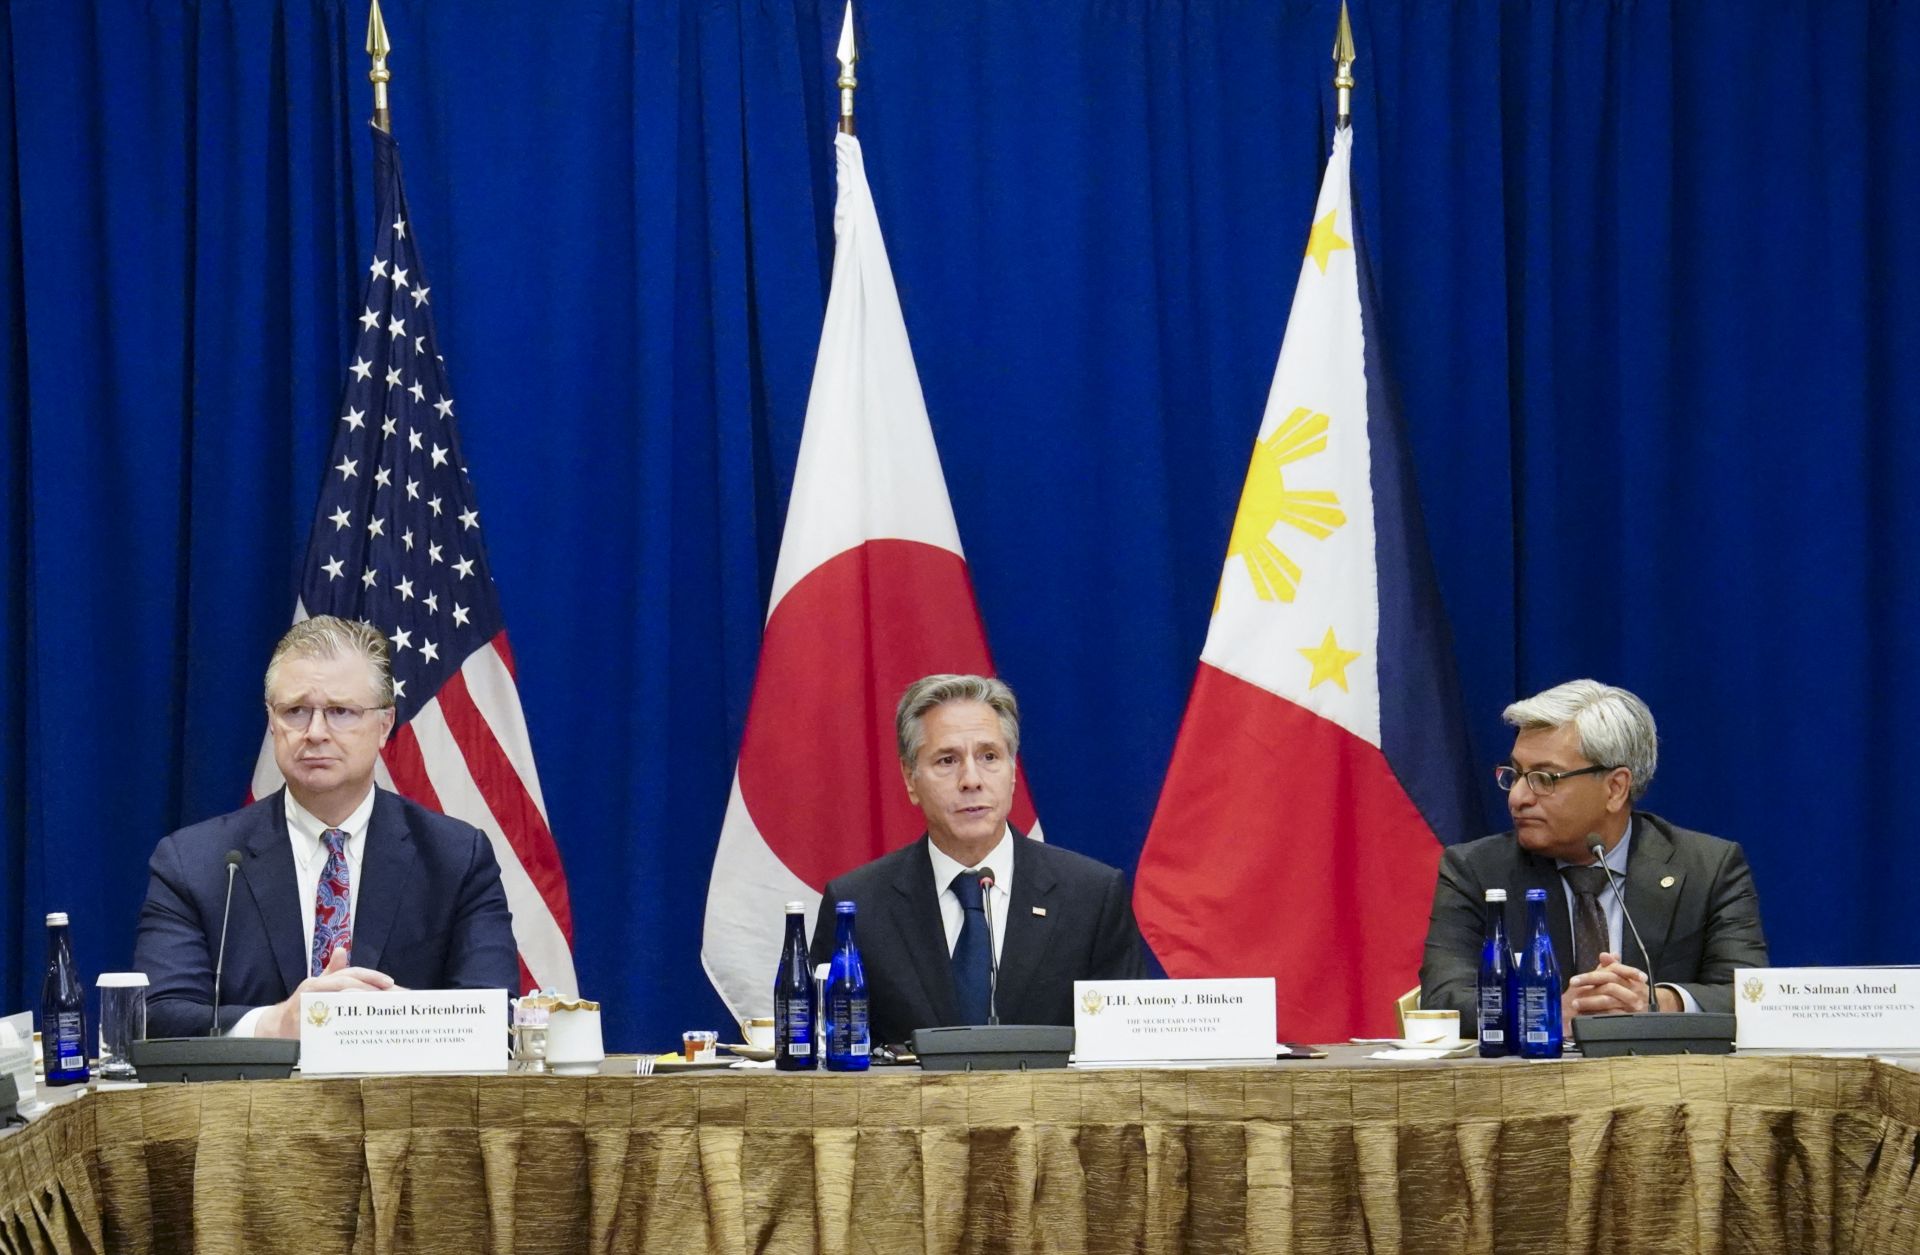 U.S. Secretary of State Antony Blinken (center), flanked by two other U.S. officials, is seen during a meeting with Japanese Foreign Minister Yoko Kamikawa and Philippine Foreign Minister Enrique Manalo (not pictured) on the sidelines of the 78th United Nations General Assembly at the Lotte Palace Hotel in New York City on Sept. 22, 2023.